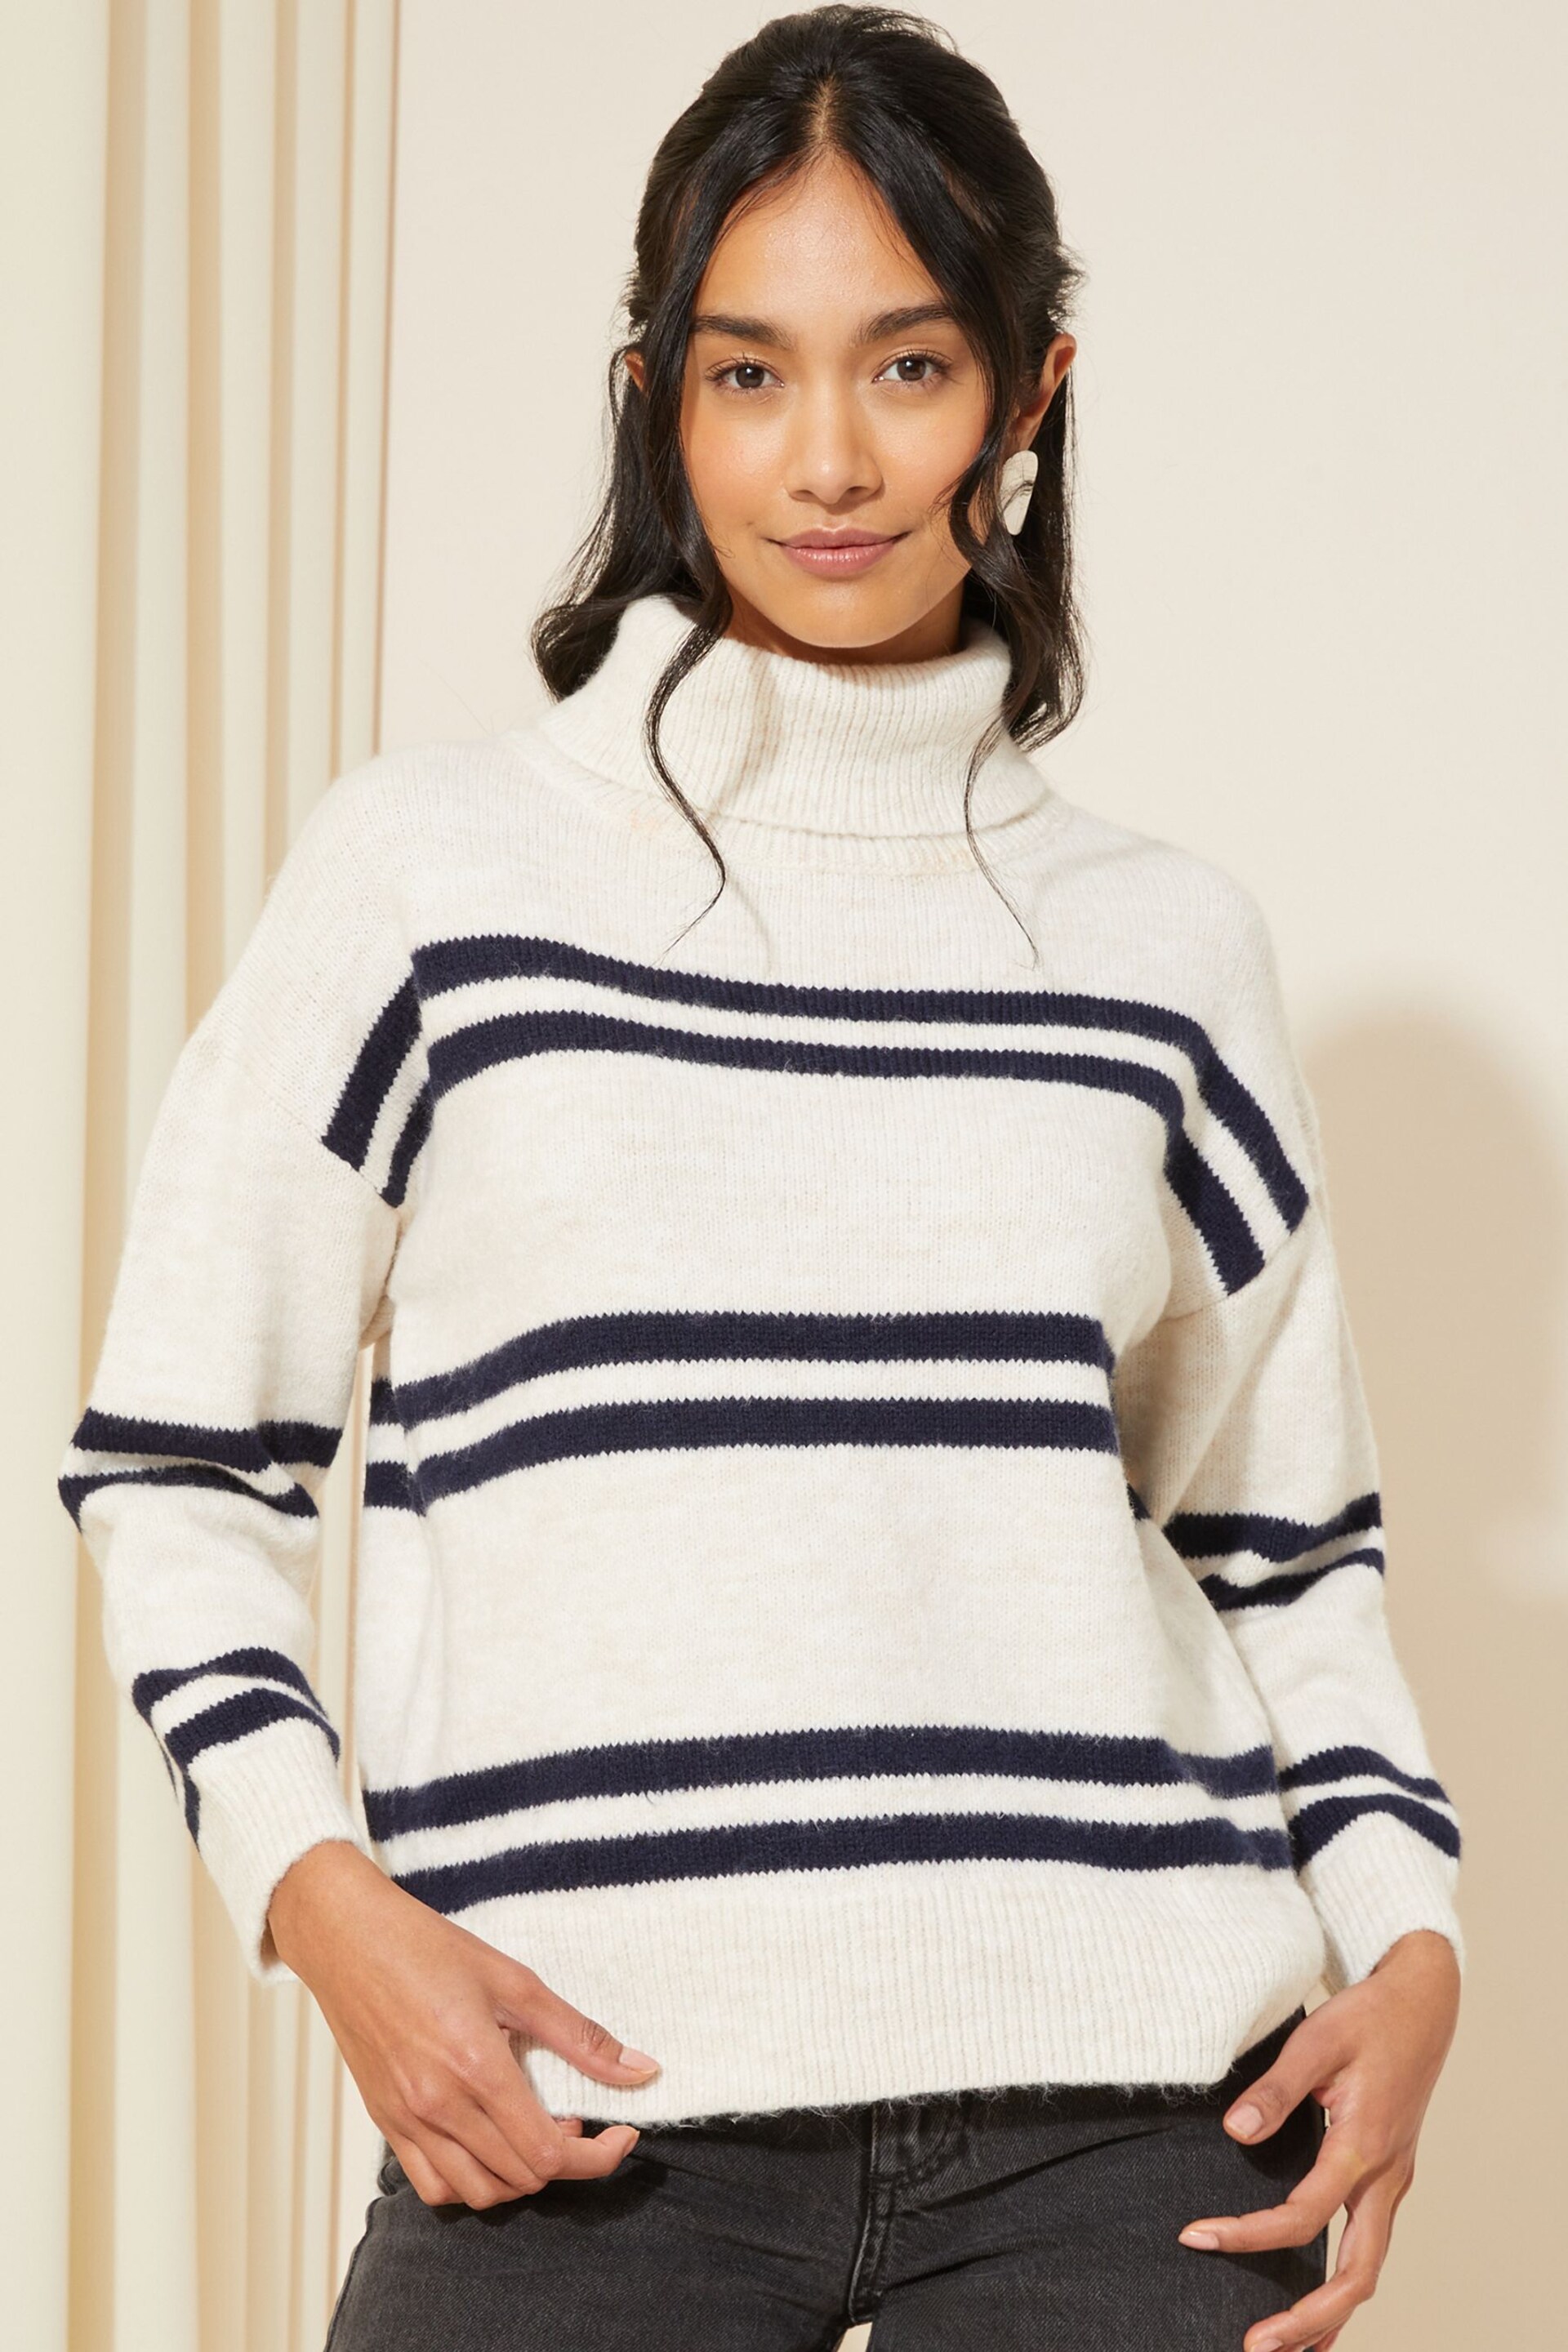 Friends Like These Black/White Stripe High Neck Jumper - Image 1 of 4